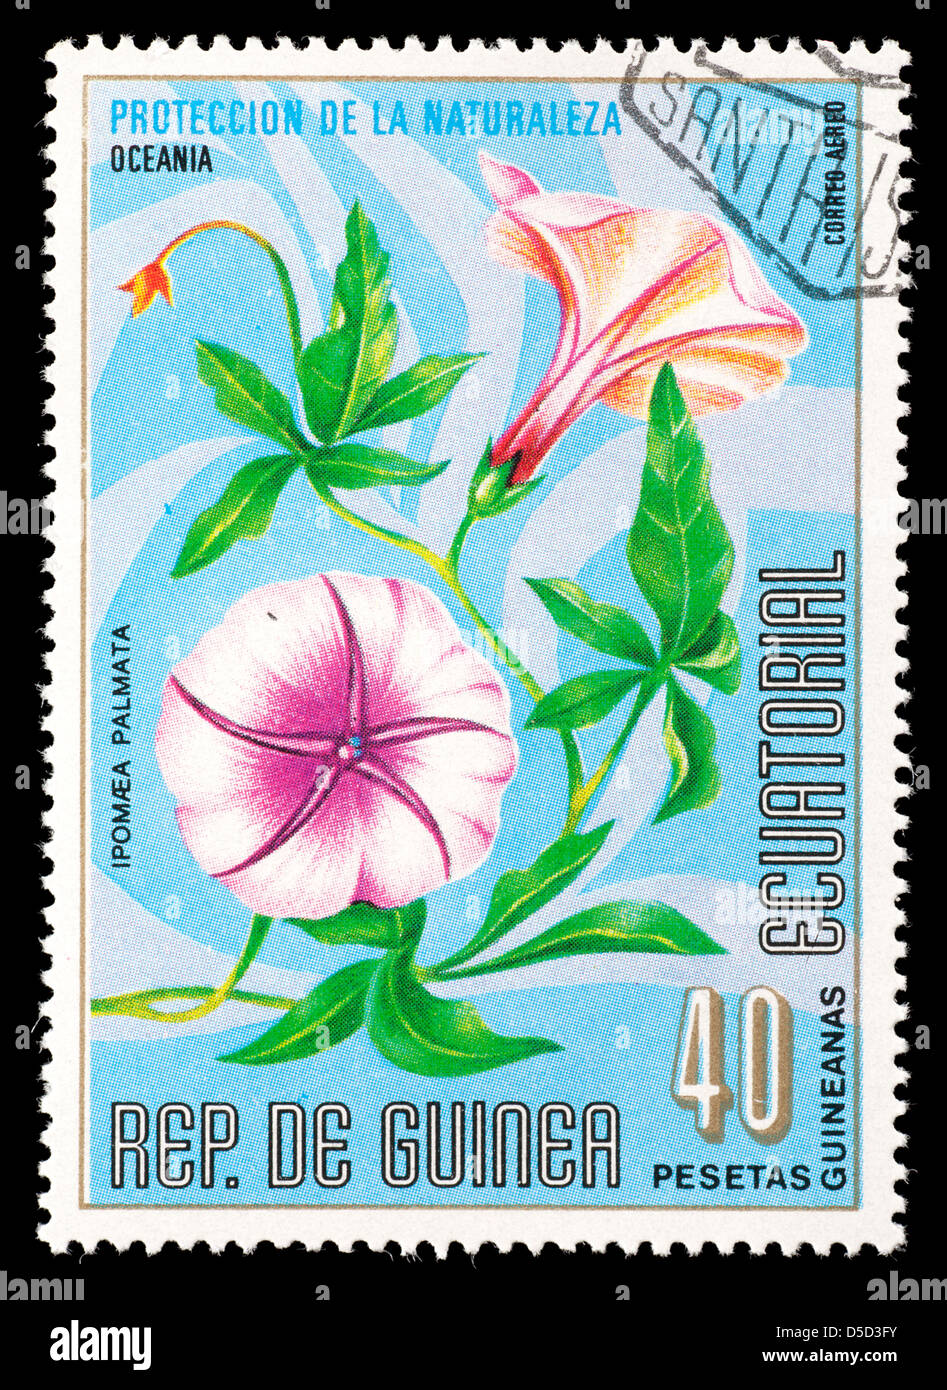 Postage stamp from Equatorial Guinea depicting a common morning glory  flower (Ipomaea palmata) Stock Photo